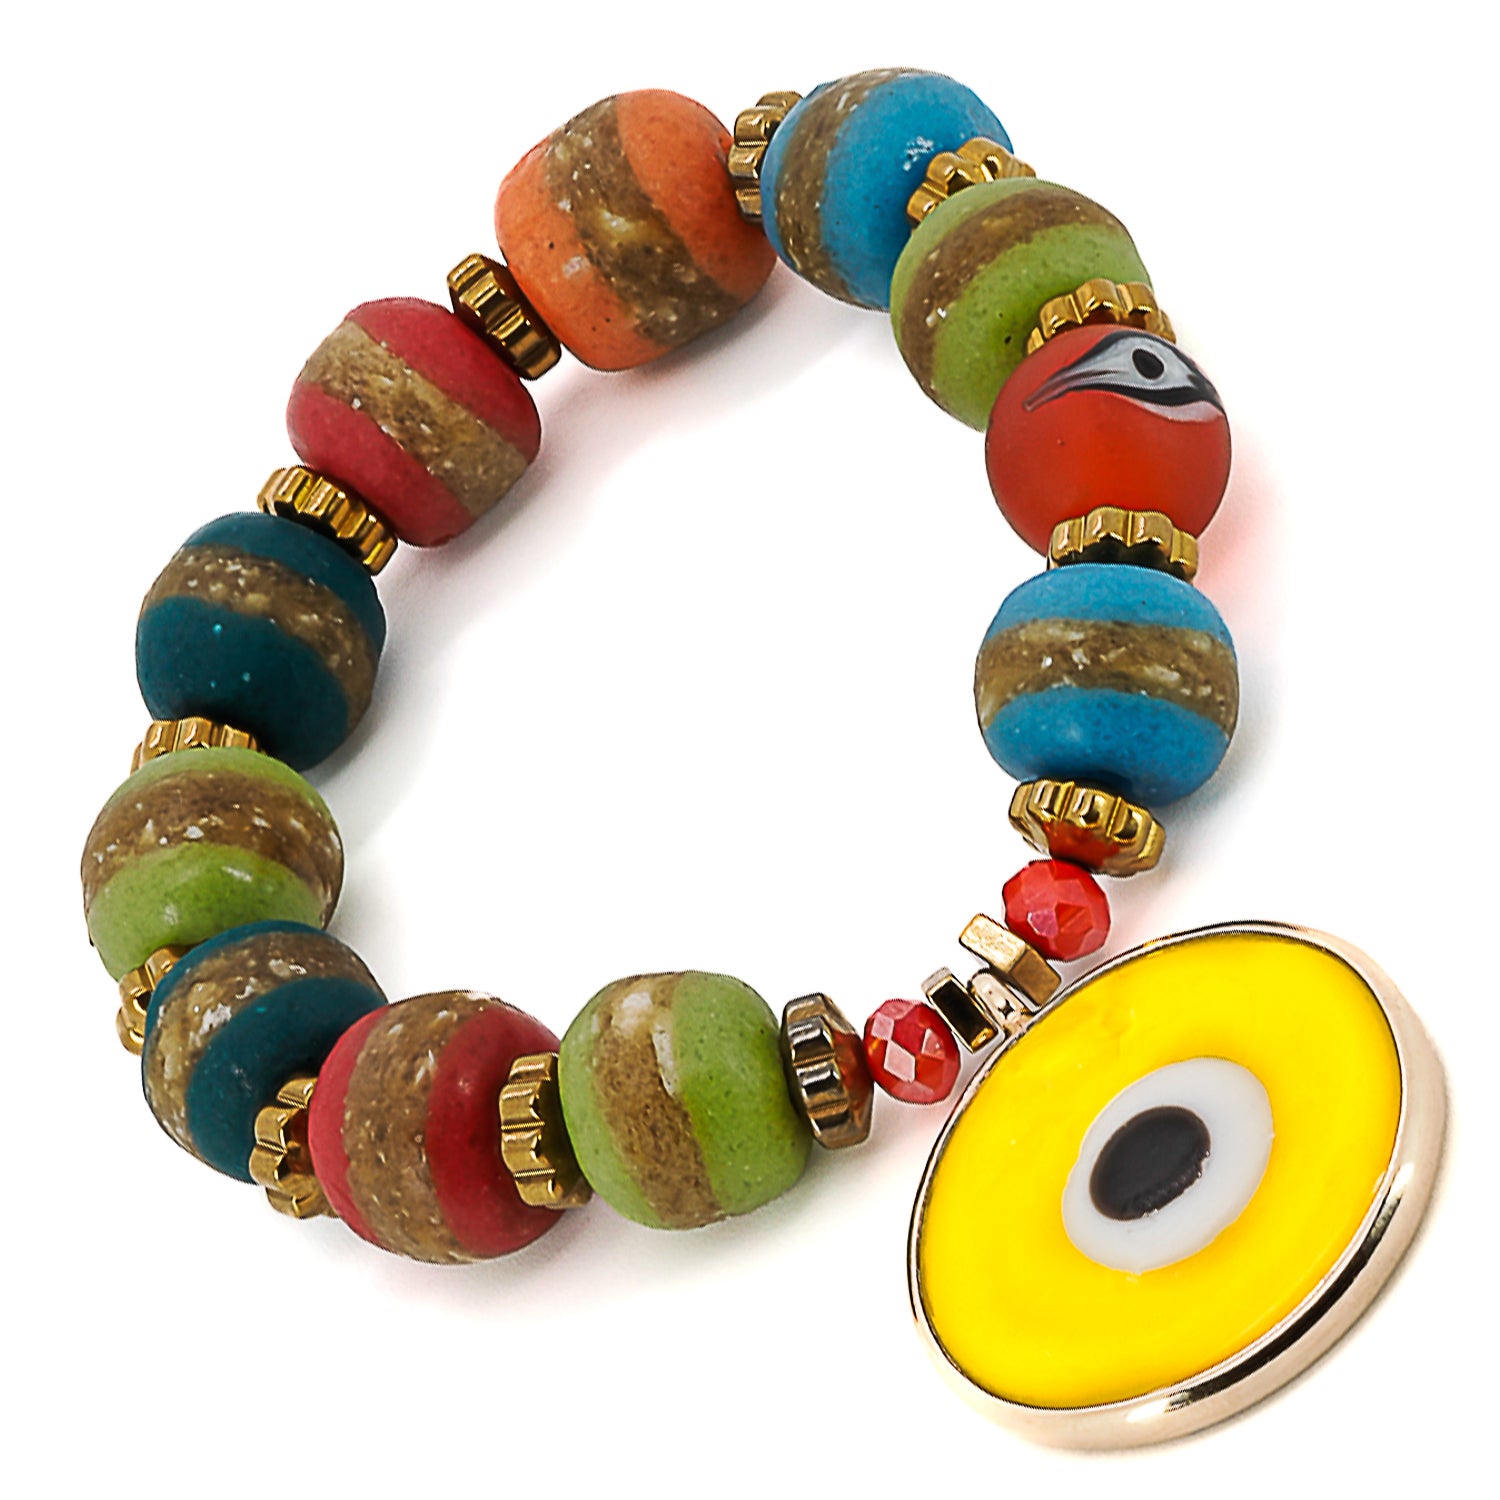 The Yellow Evil Eye Carpe Diem Bracelet combines vibrant colors and symbolic meaning, making it a unique and meaningful accessory.